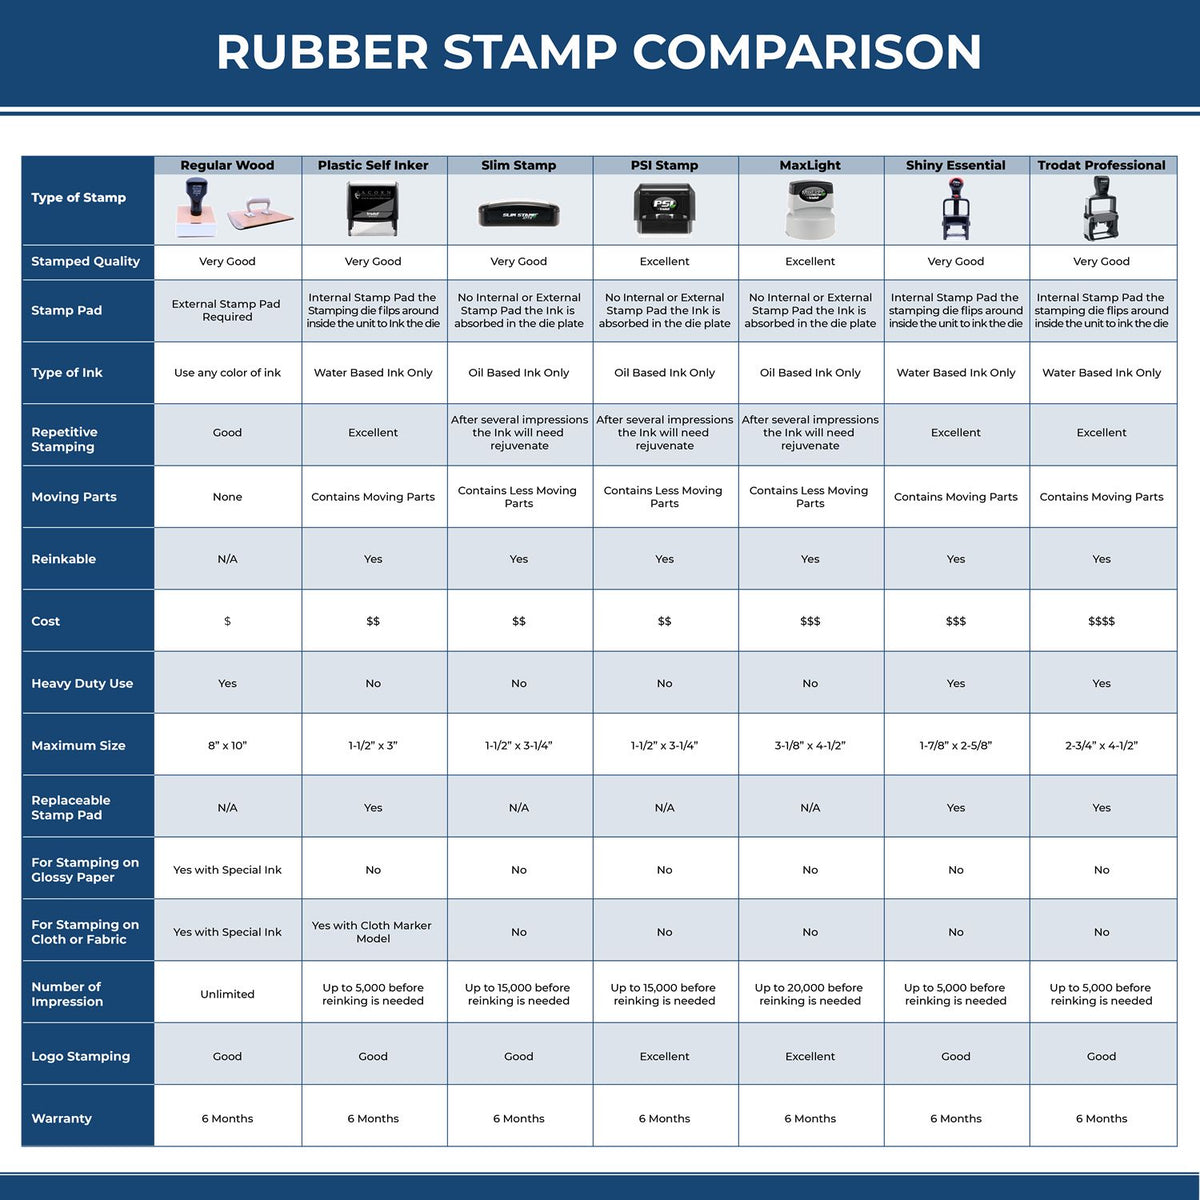 Large Rush with Rabbit Rubber Stamp 5665R Rubber Stamp Comparison